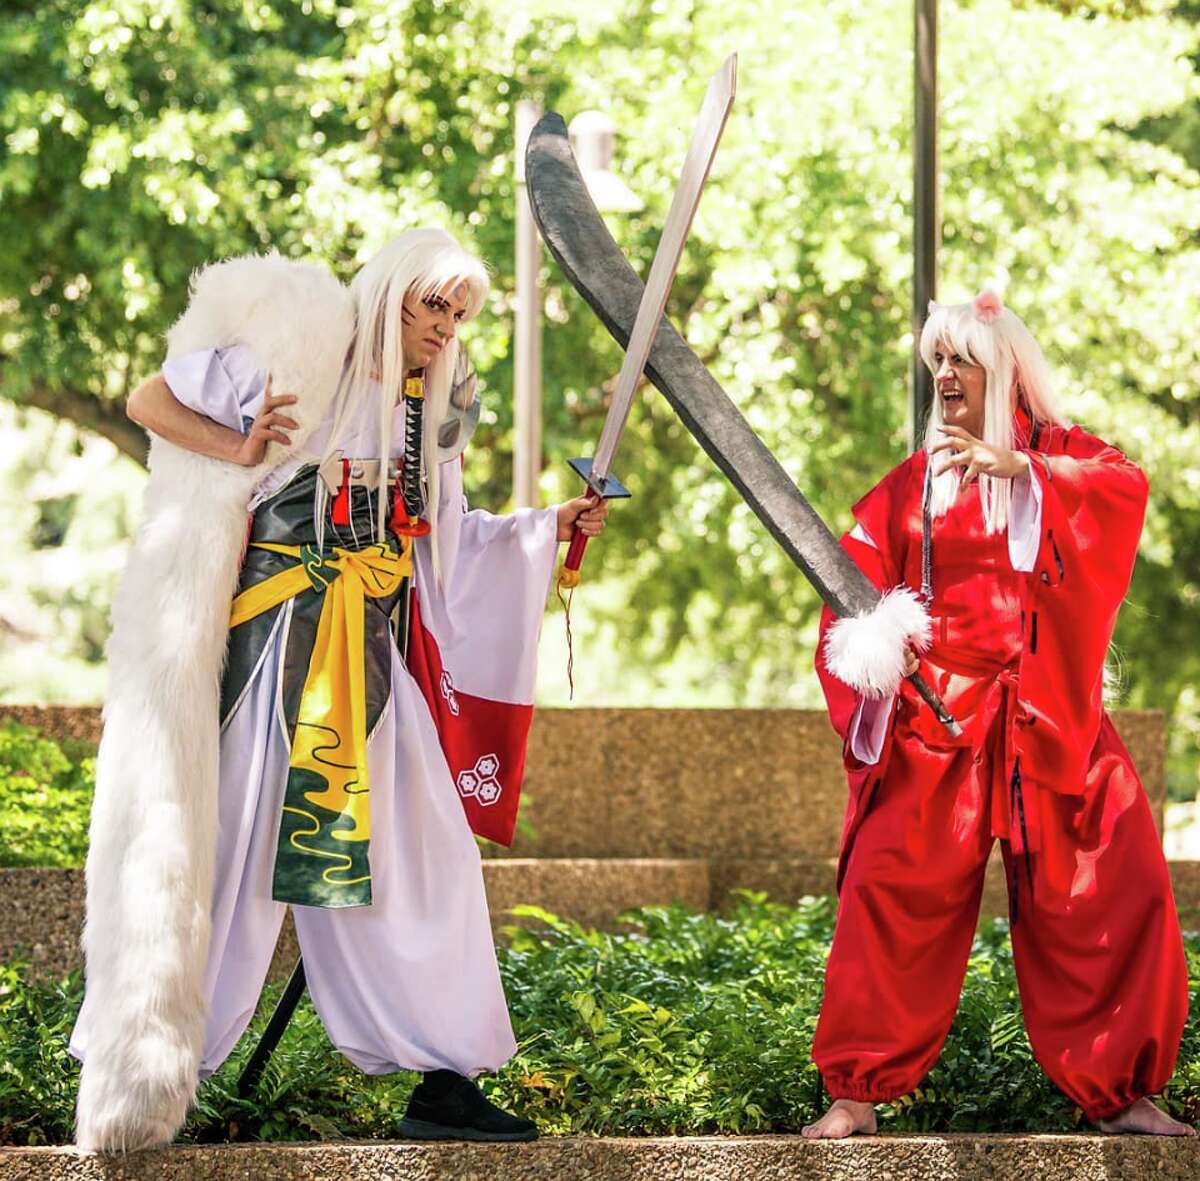 Josh Wilson recreates a fight against brothers from the anime Inuyasha.